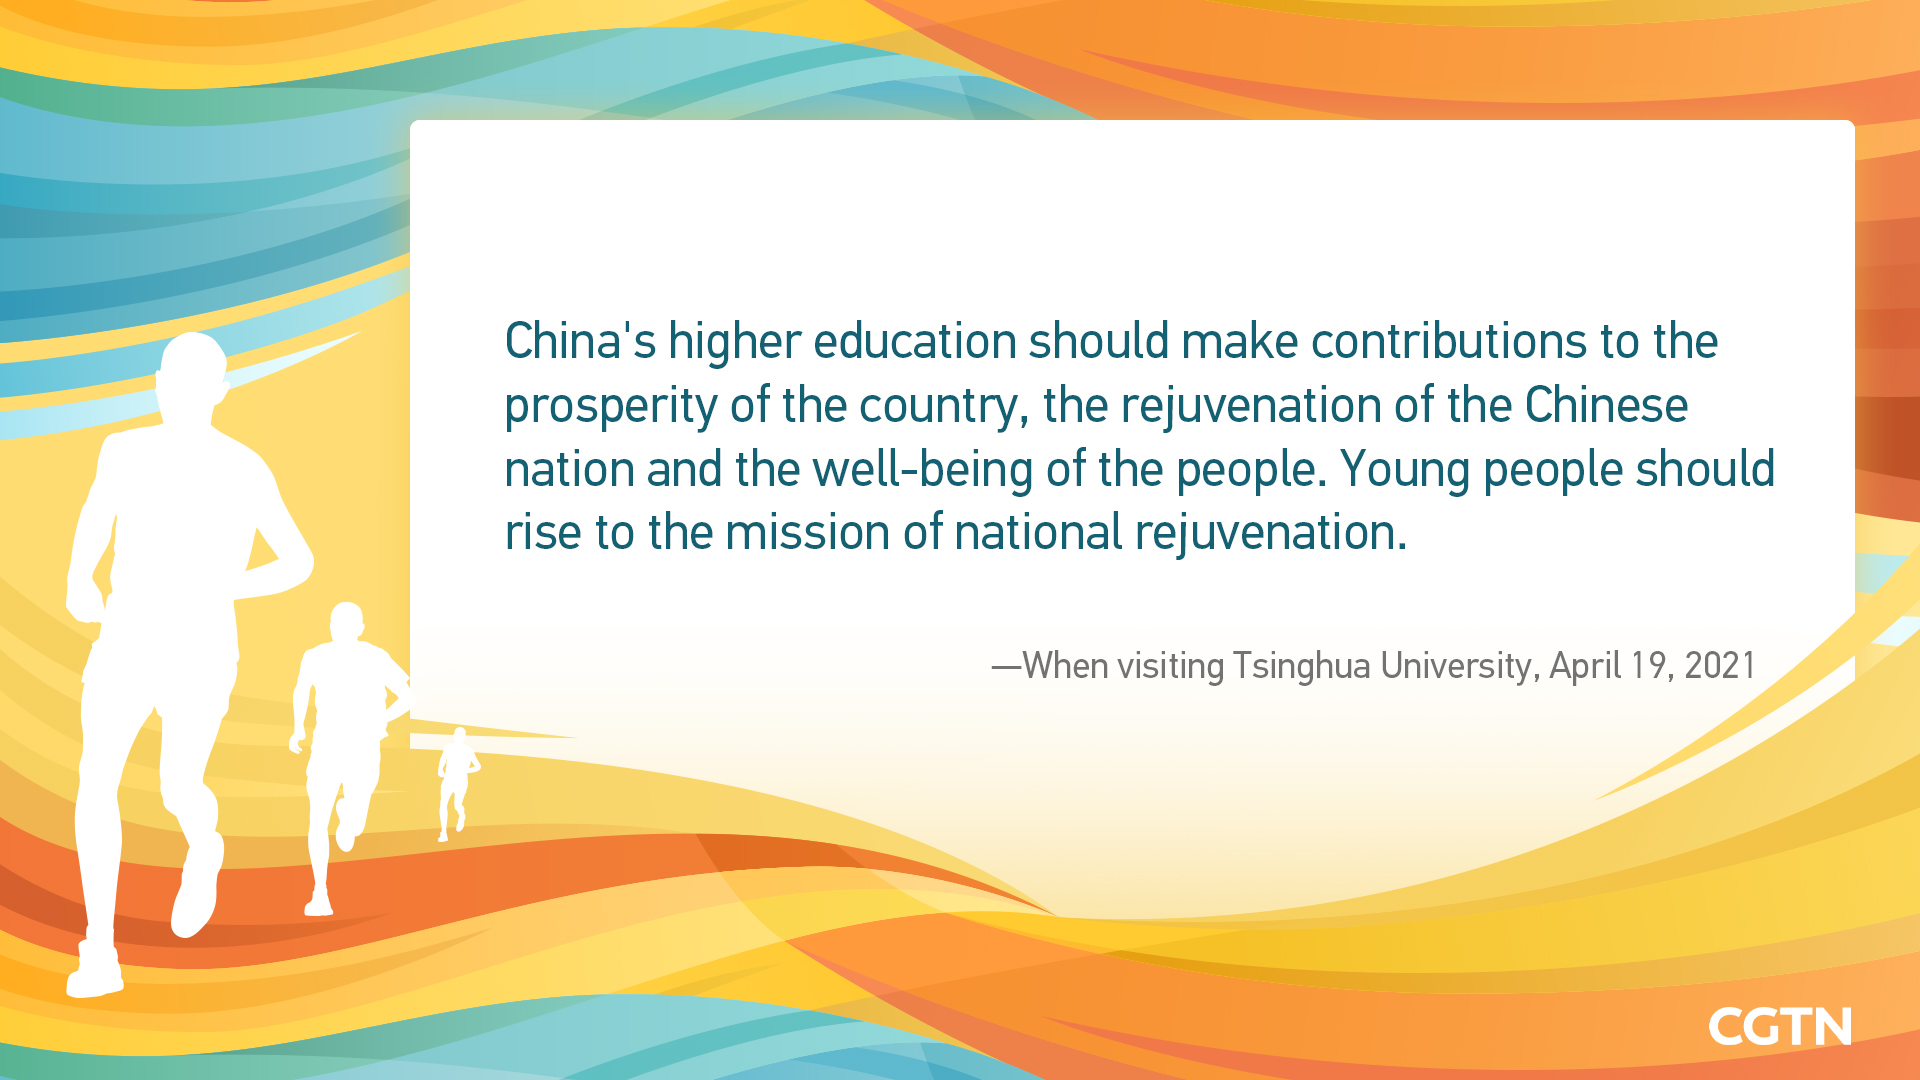 How does Xi Jinping encourage Chinese youth to achieve life values?